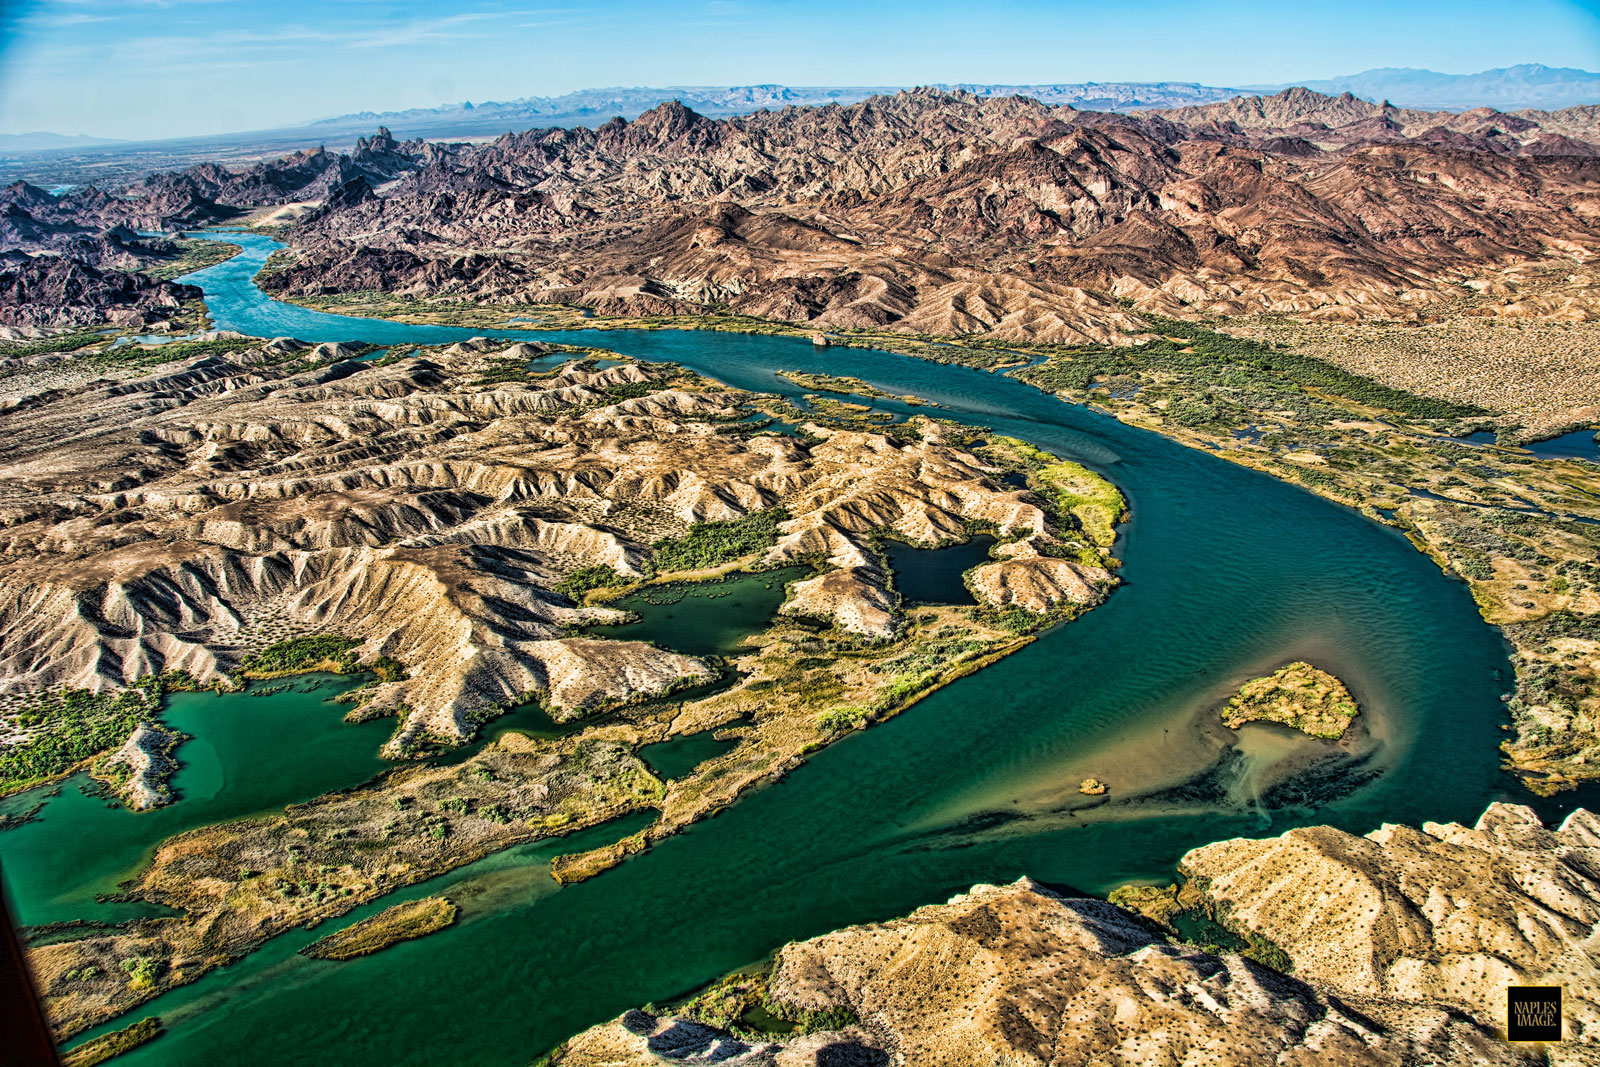 Feeding Lake Havasu and making it all possible is the Colorado River. 